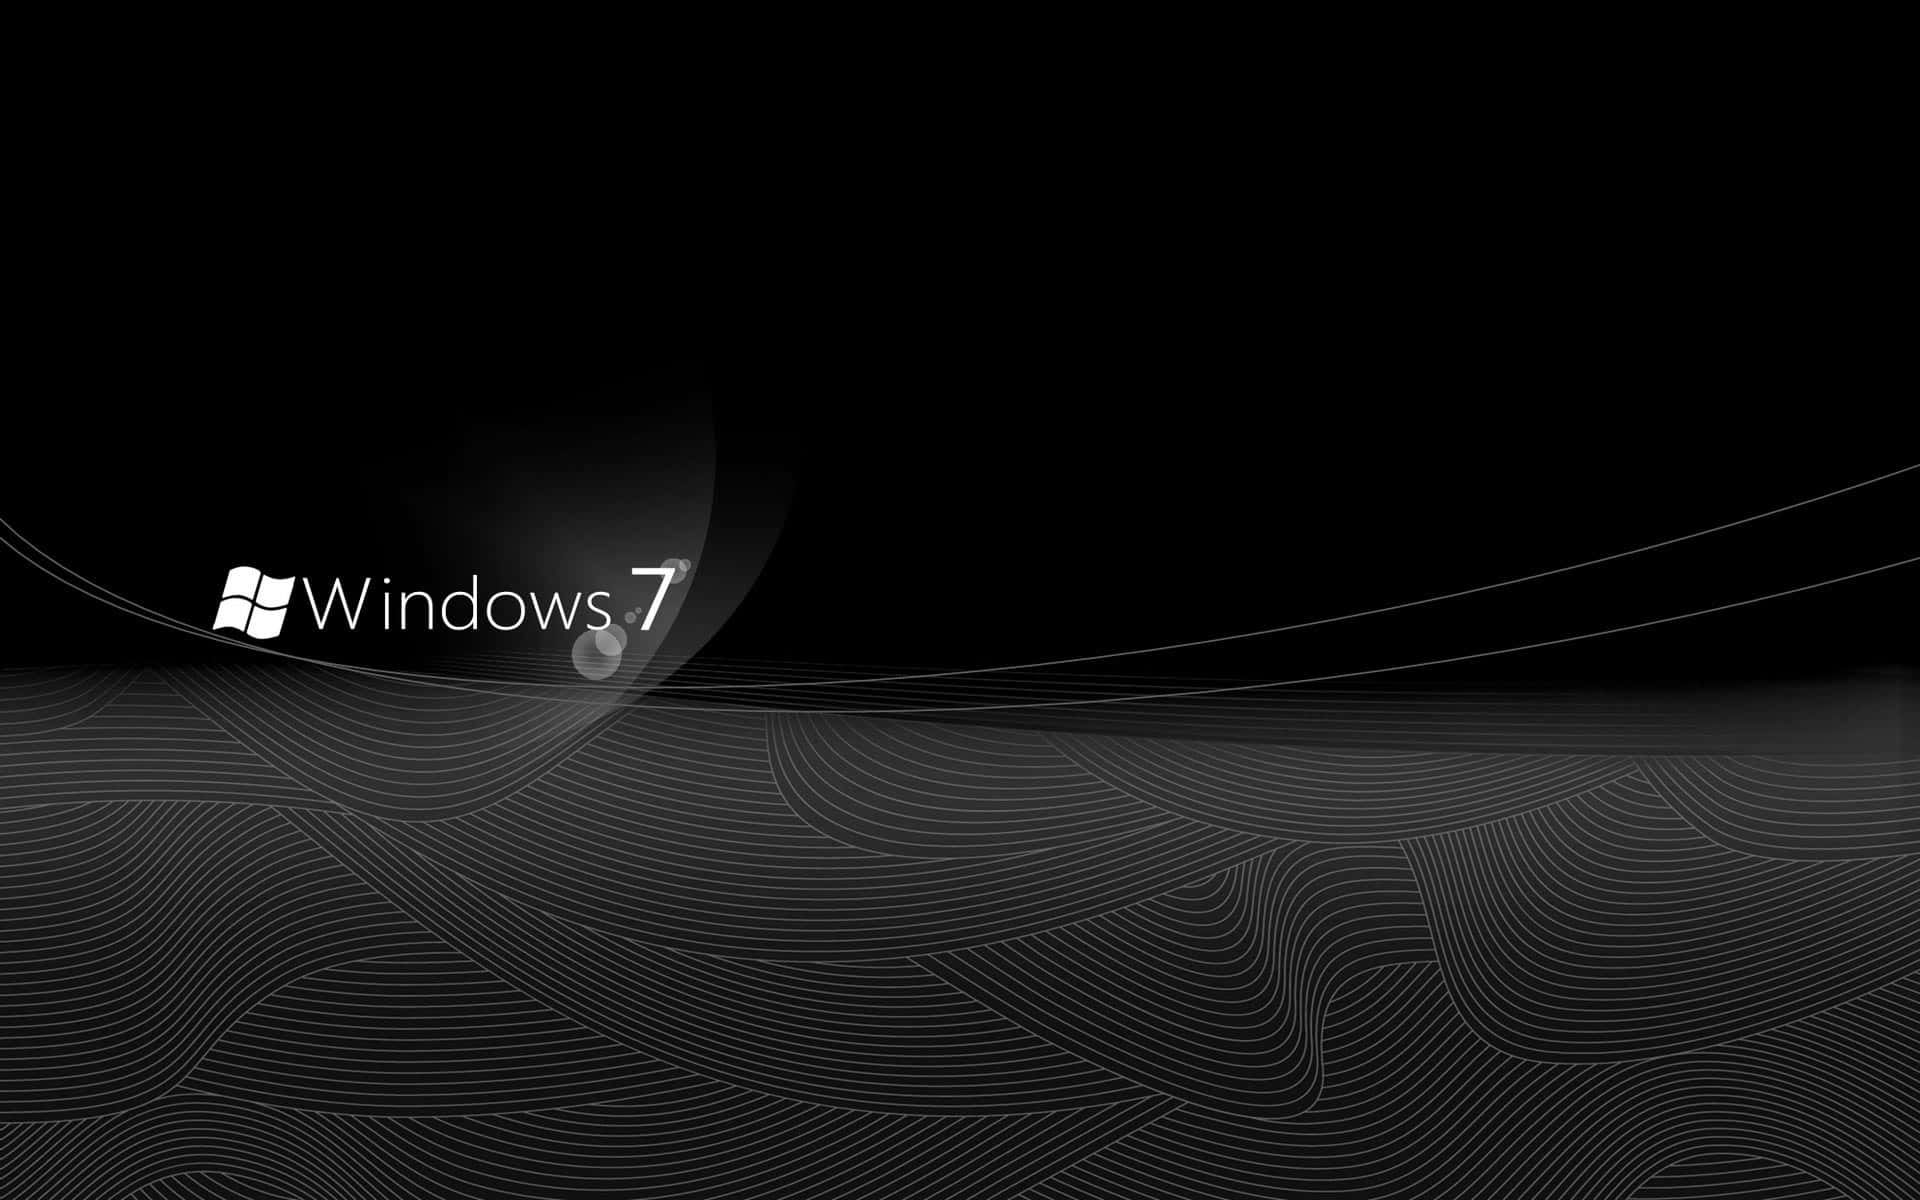 Windows 7 Wallpapers, Black And White